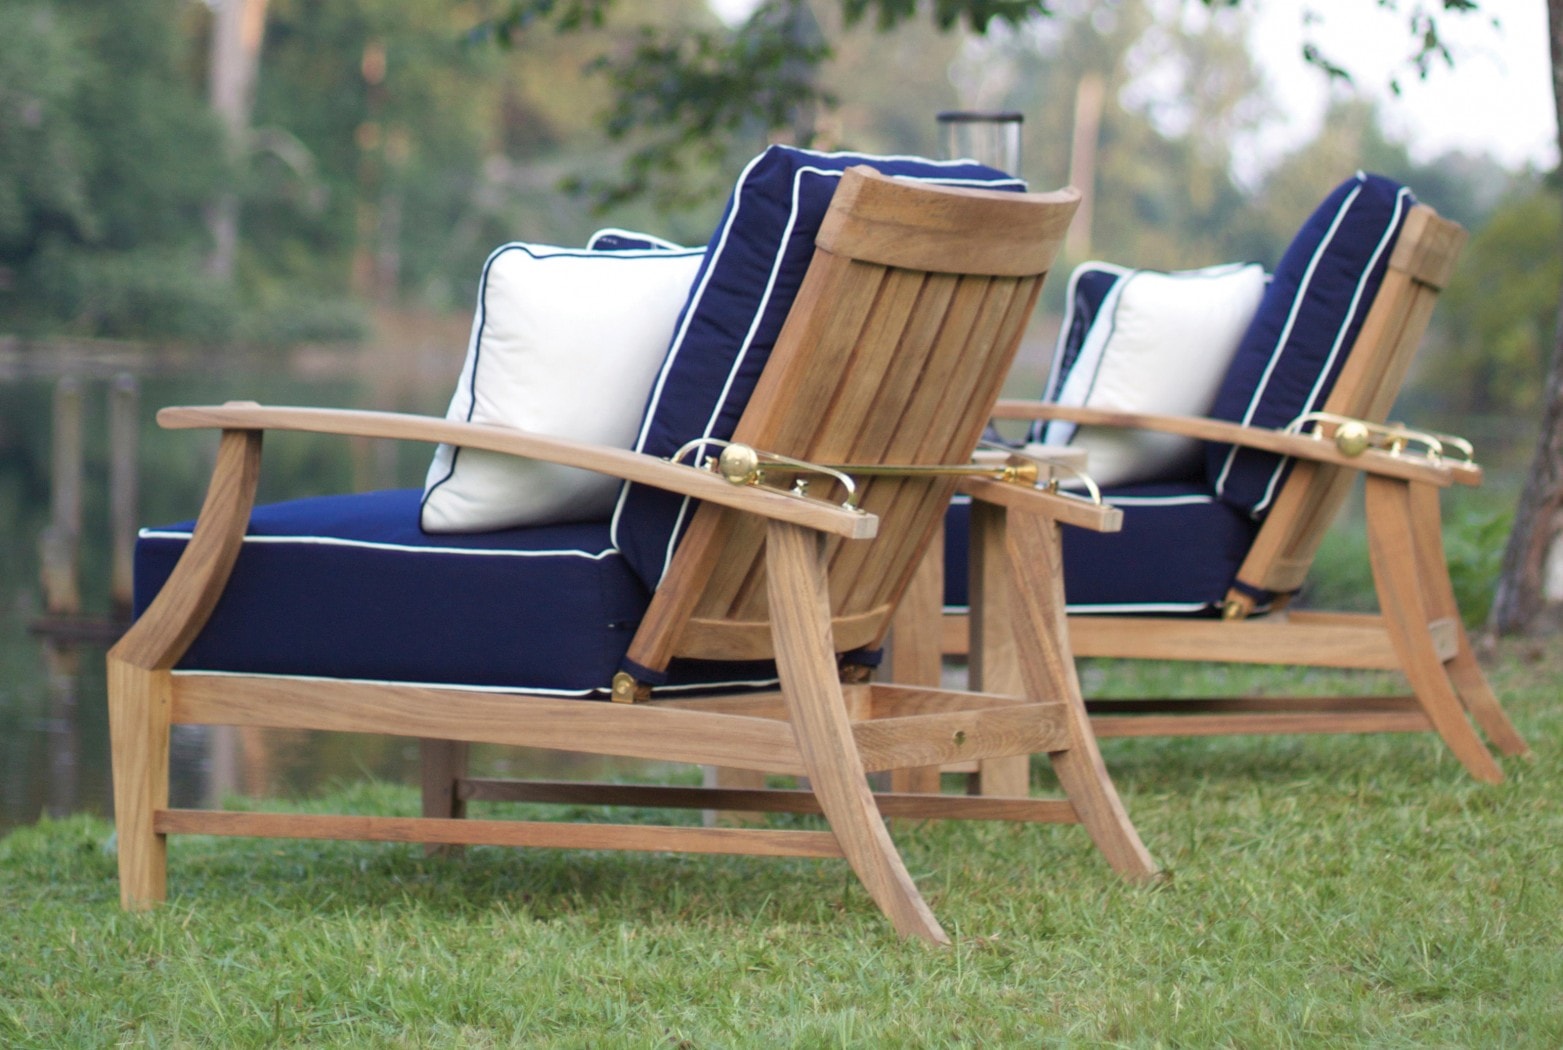 Croquet Teak Collection by Summer Classics